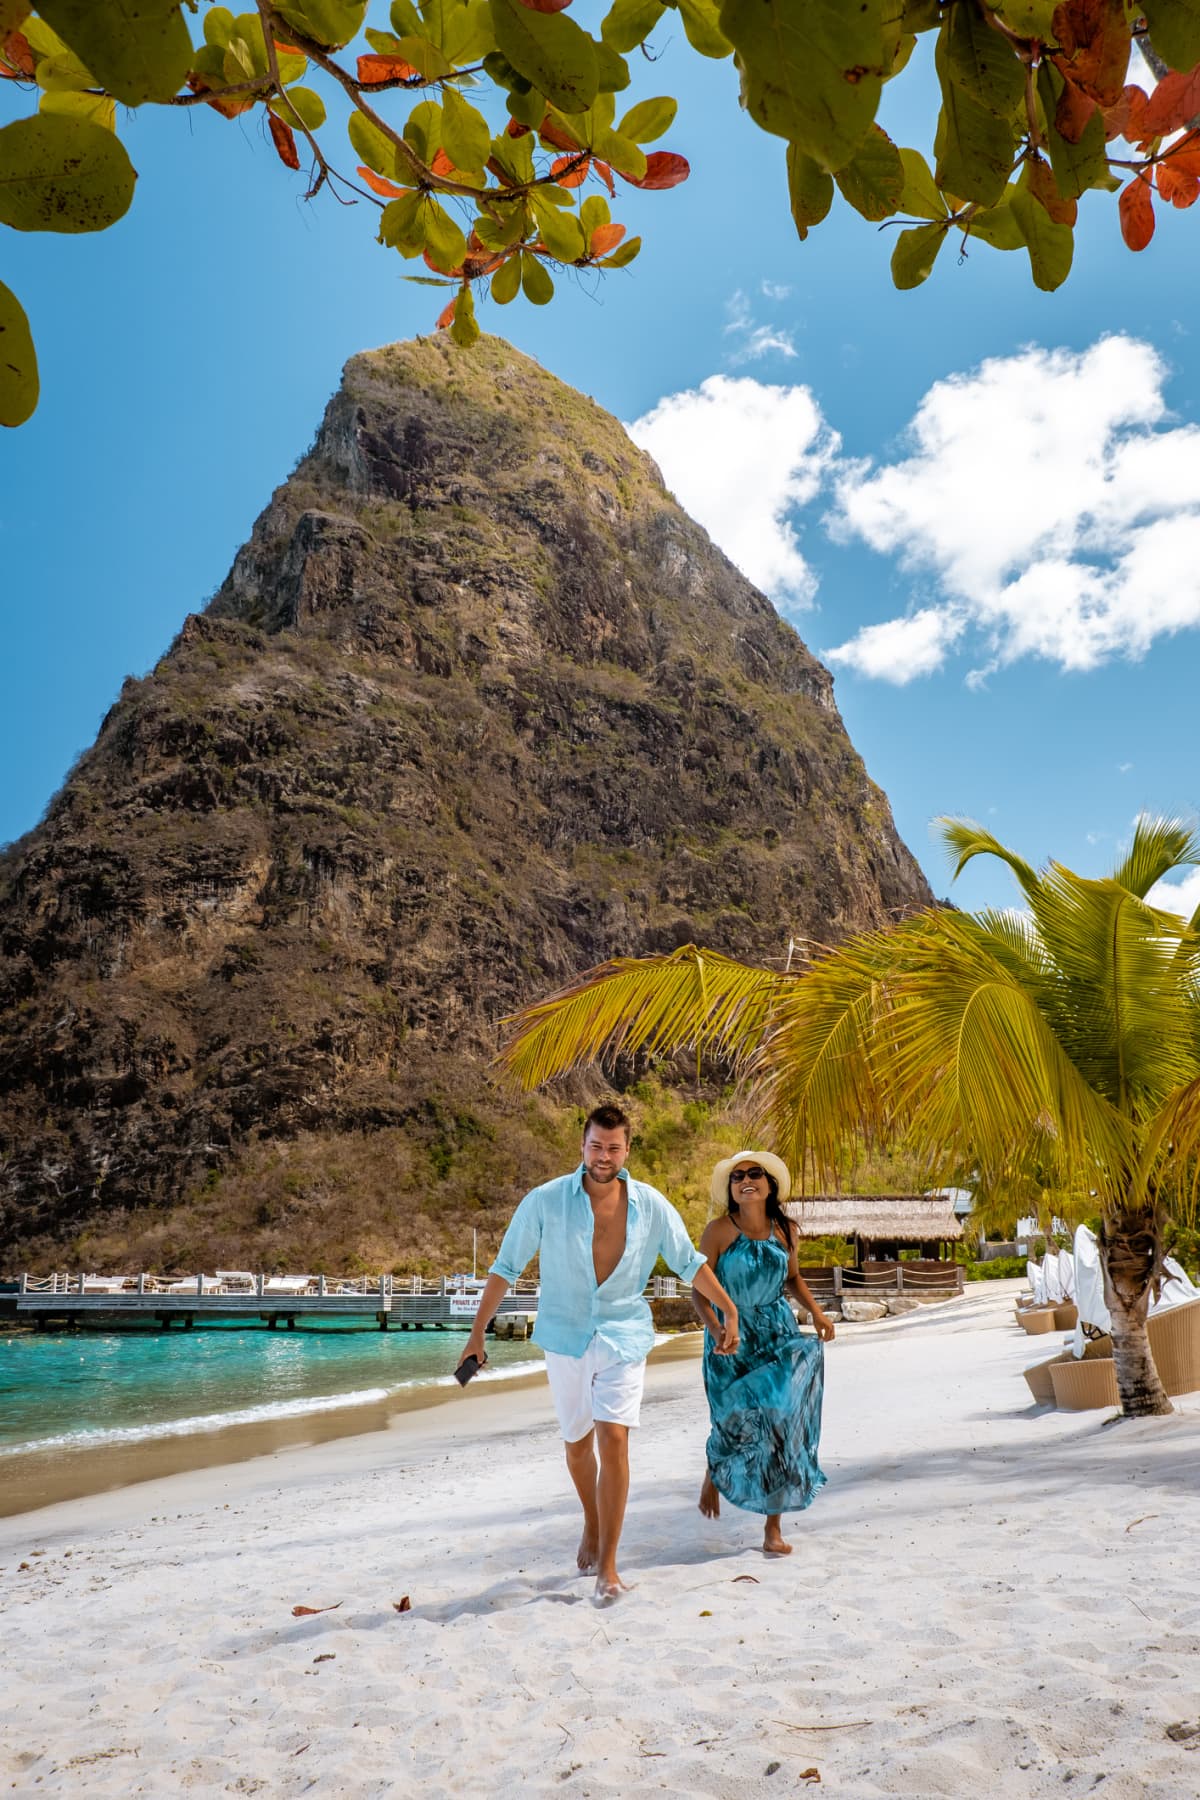 A couple enjoying the private beach at an all-inclusive resort in St. Lucia